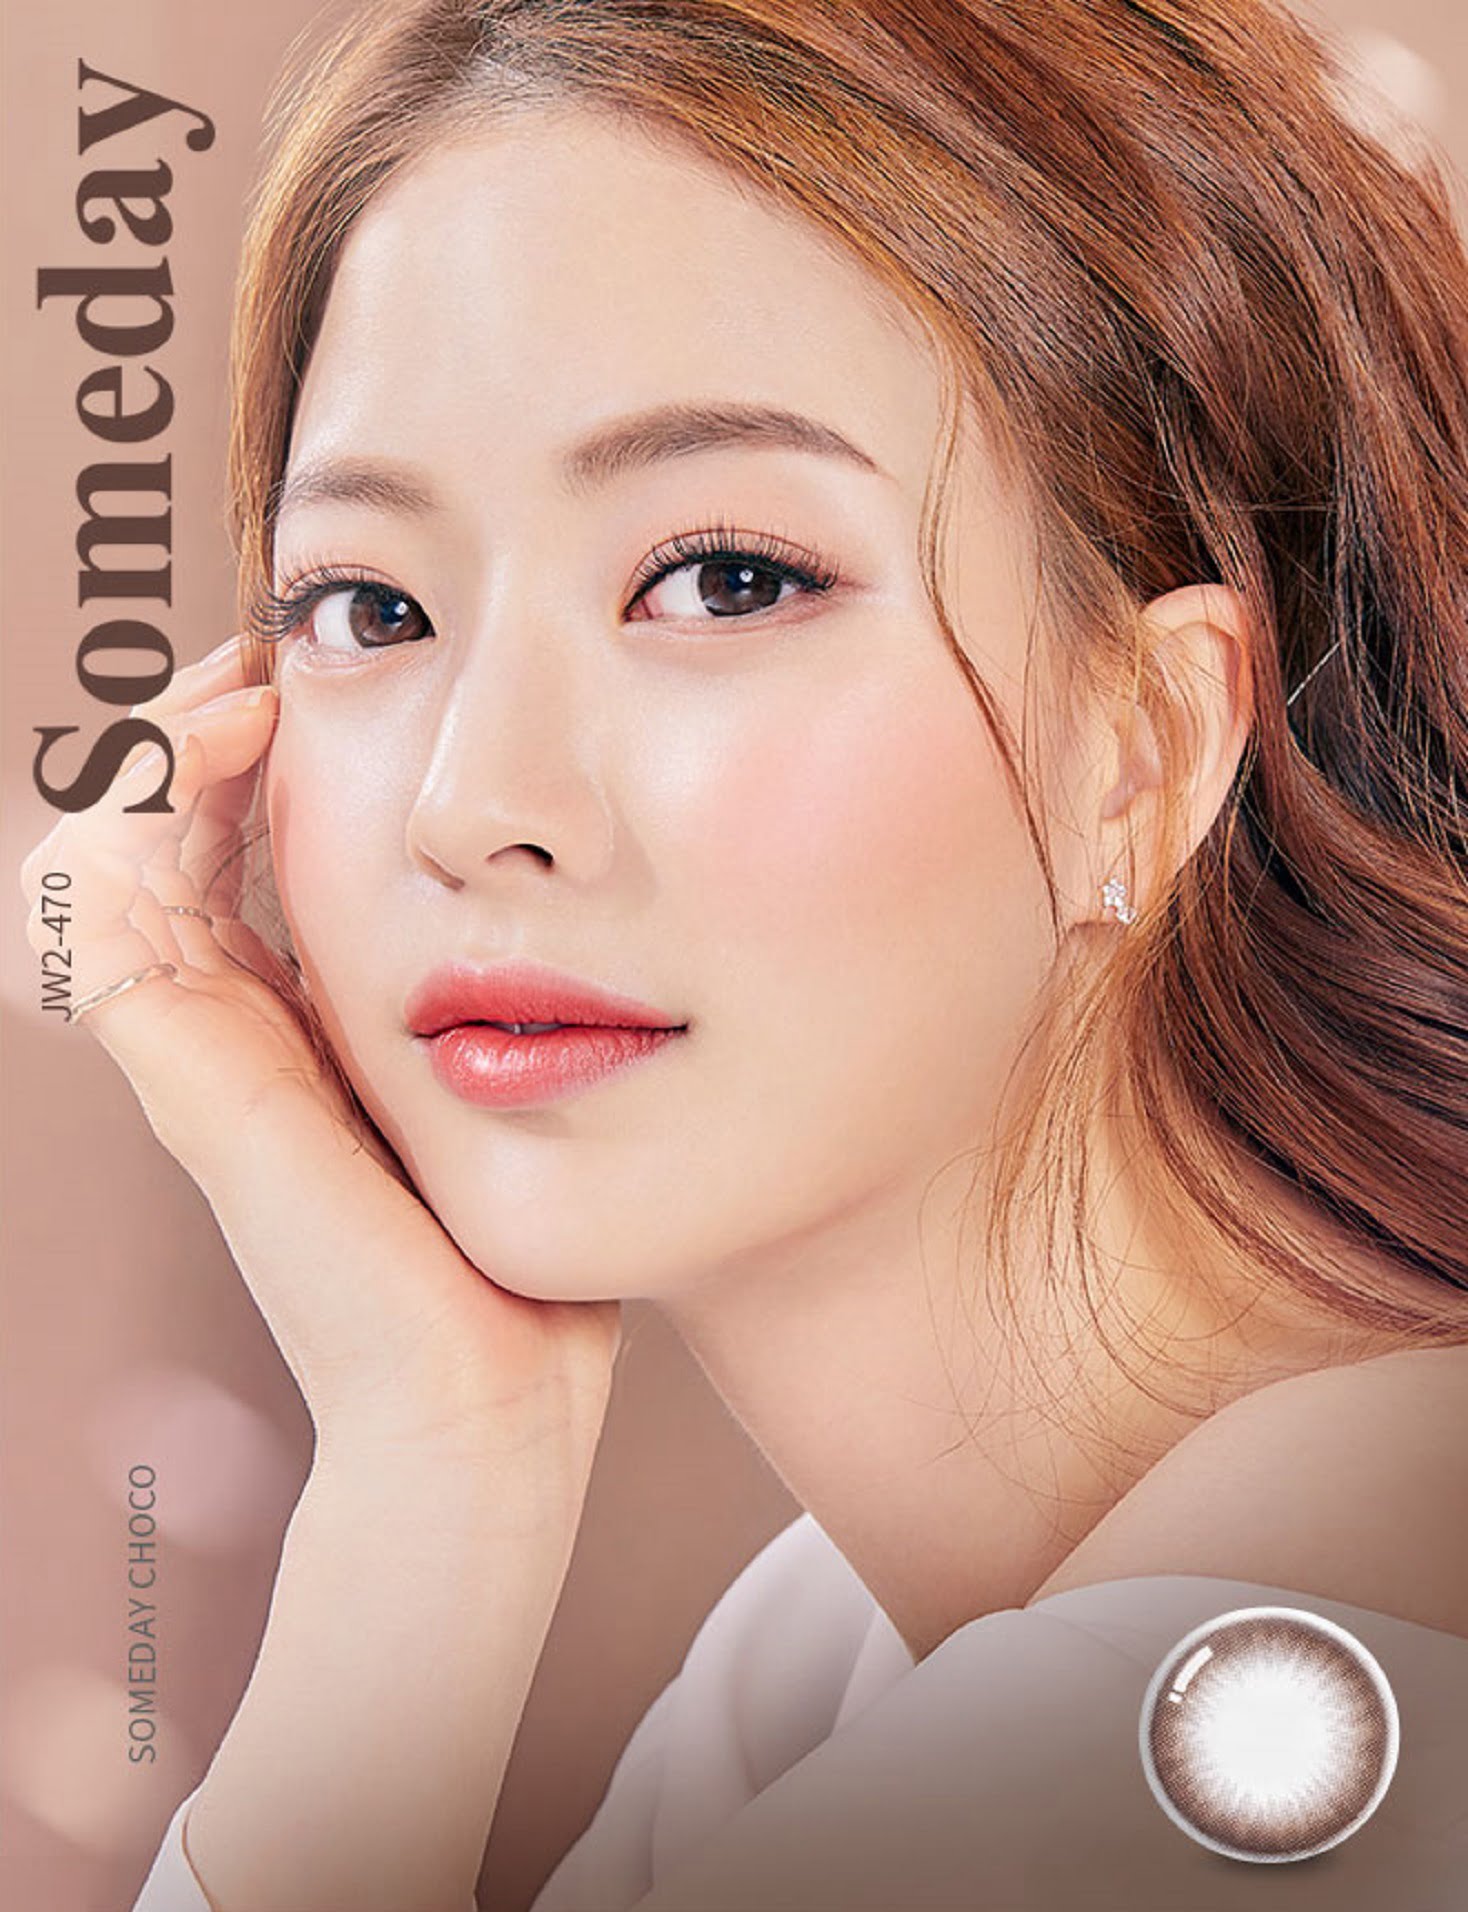 olens-someday-choco-is-perfect-to-brighten-and-highlight-your-eyes